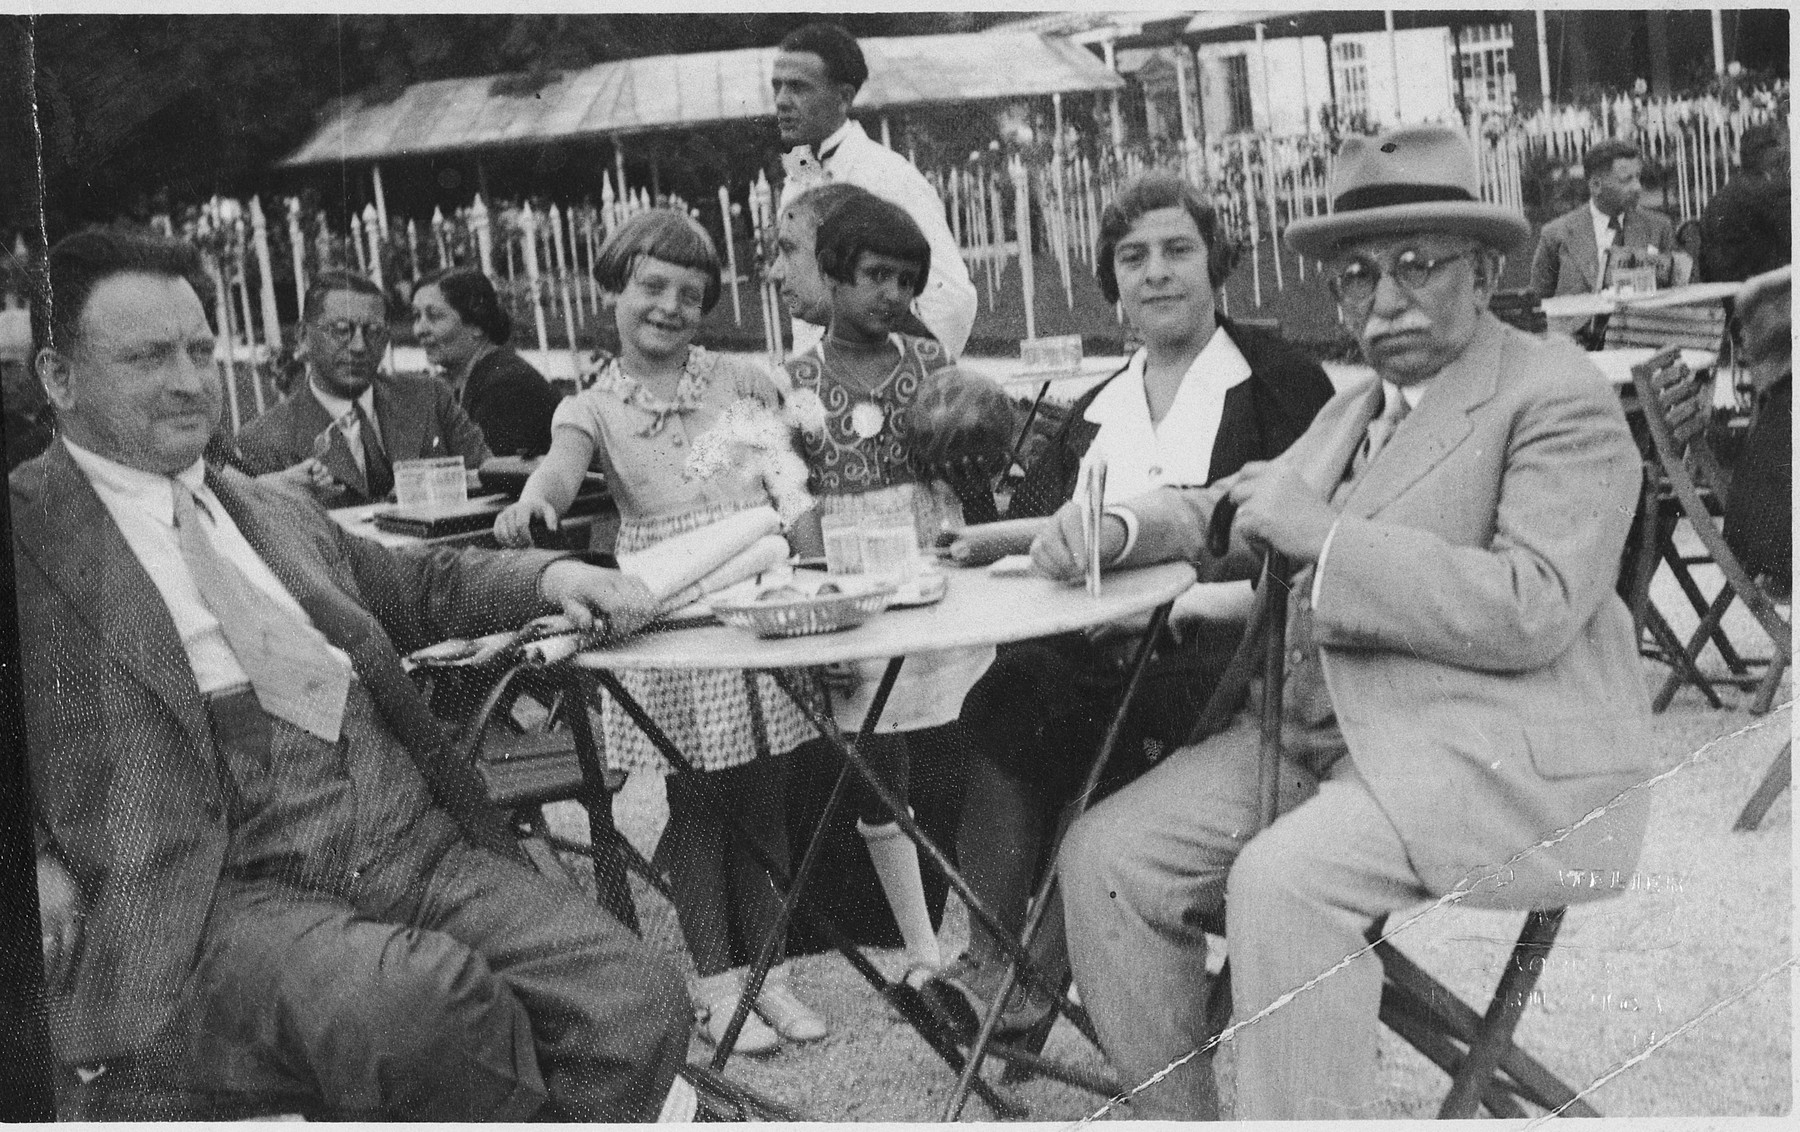 The Wessel family enjoys a visit to an outdoor cafe.

Pictured from left to right are Samuel Wessel, his daughter Roma, a friend, his wife Rosa and another friend or relative.